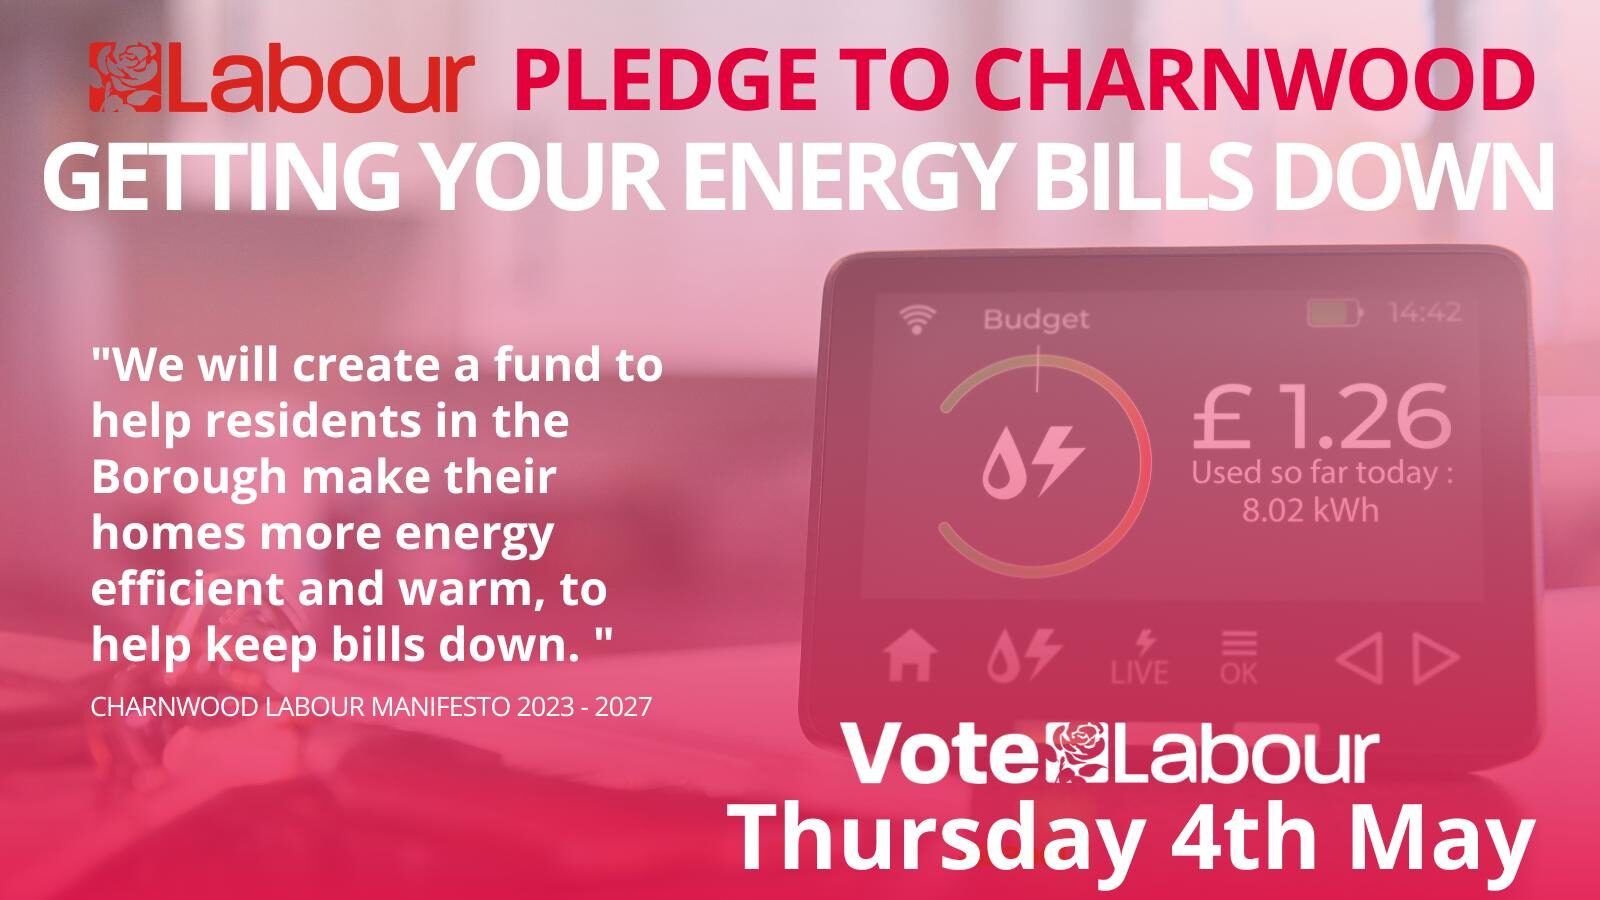 GETTING YOUR ENERGY BILLS DOWN